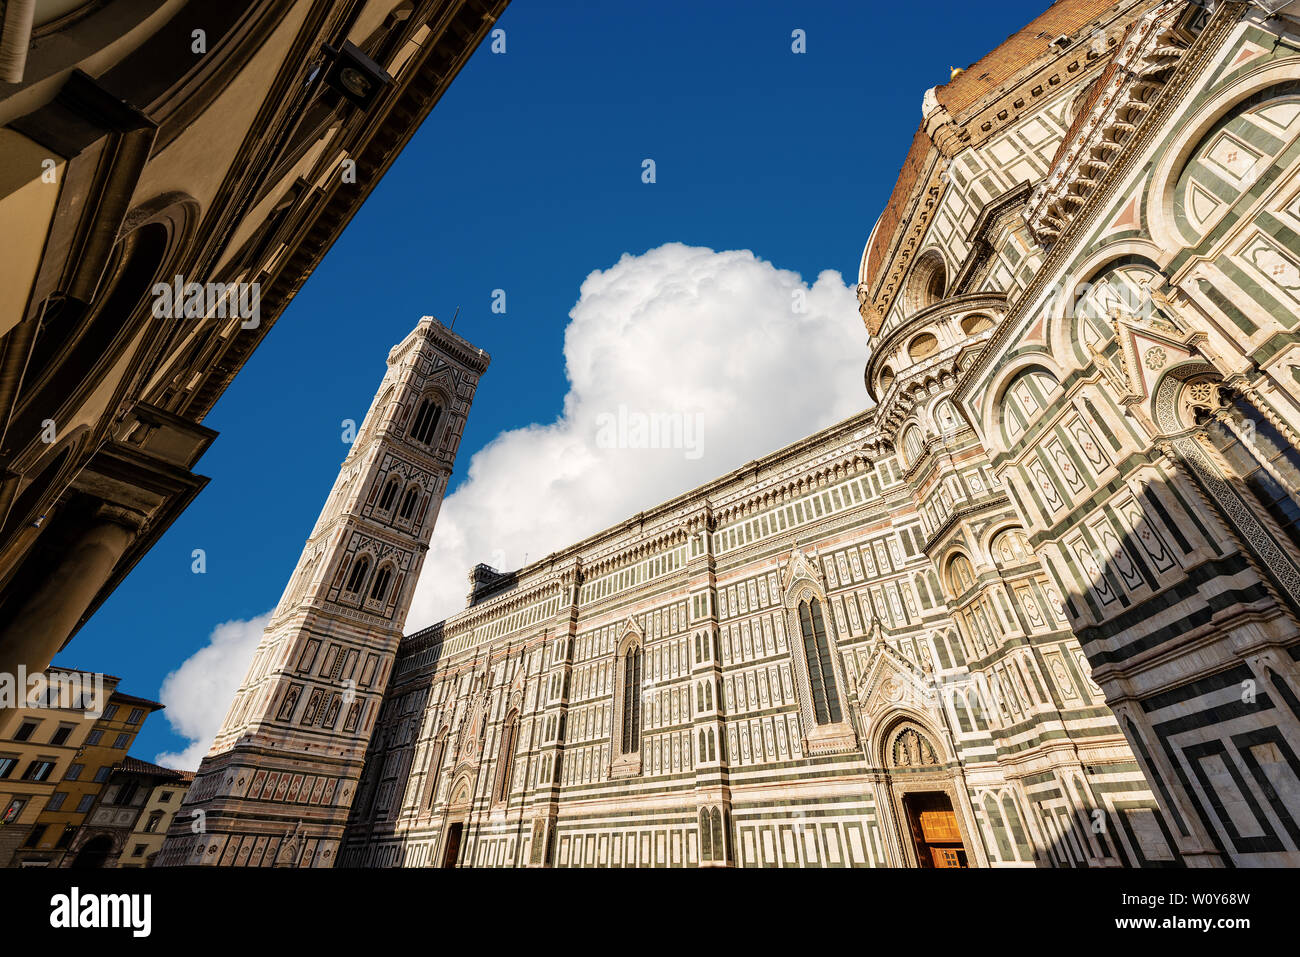 Florence Cathedral (Duomo di Firenze) and Bell Tower of Giotto, Tuscany Italy. Santa Maria del Fiore (1296-1436) UNESCO world heritage site Stock Photo